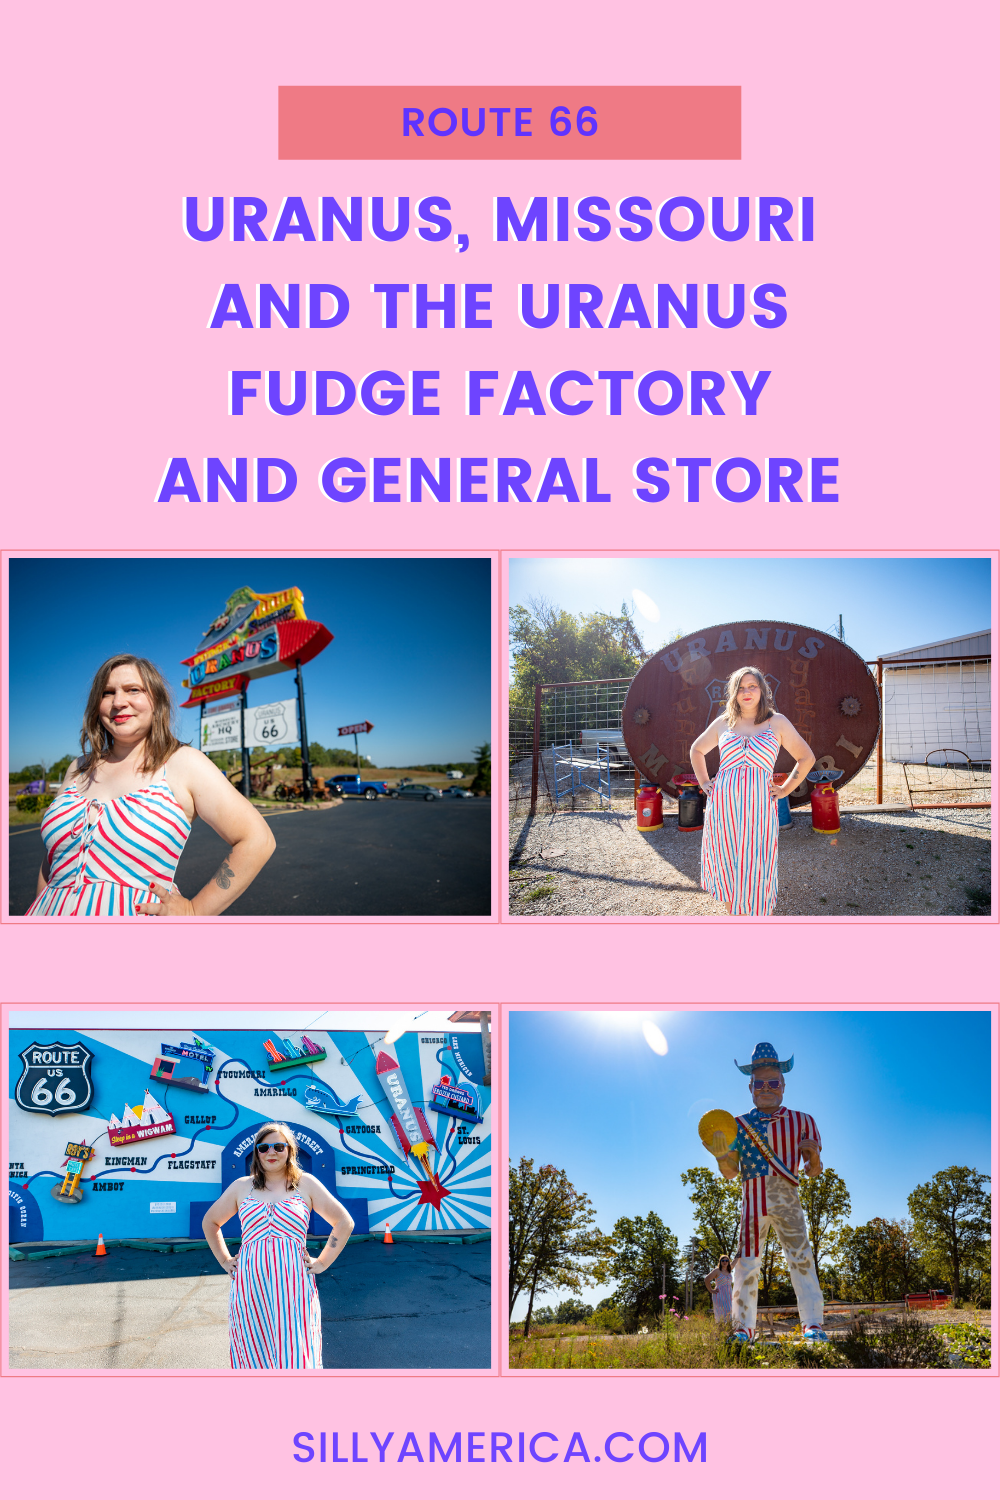 If you’re looking for a unique Route 66 attraction, you’ve got to pick Uranus. Uranus, Missouri that is. Visit the town on a Route 66 road trip, stop for fudge at Uranus Fudge Factory and General Store, and check out all of the weird Missouri roadside attractions while you're there!  #Route66 #Route66RoadTrip #MissouriRoute66 #Missouri #MissouriRoadTrip #MissouriRoadsideAttractions #RoadsideAttractions #RoadsideAttraction #RoadsideAmerica #RoadTrip